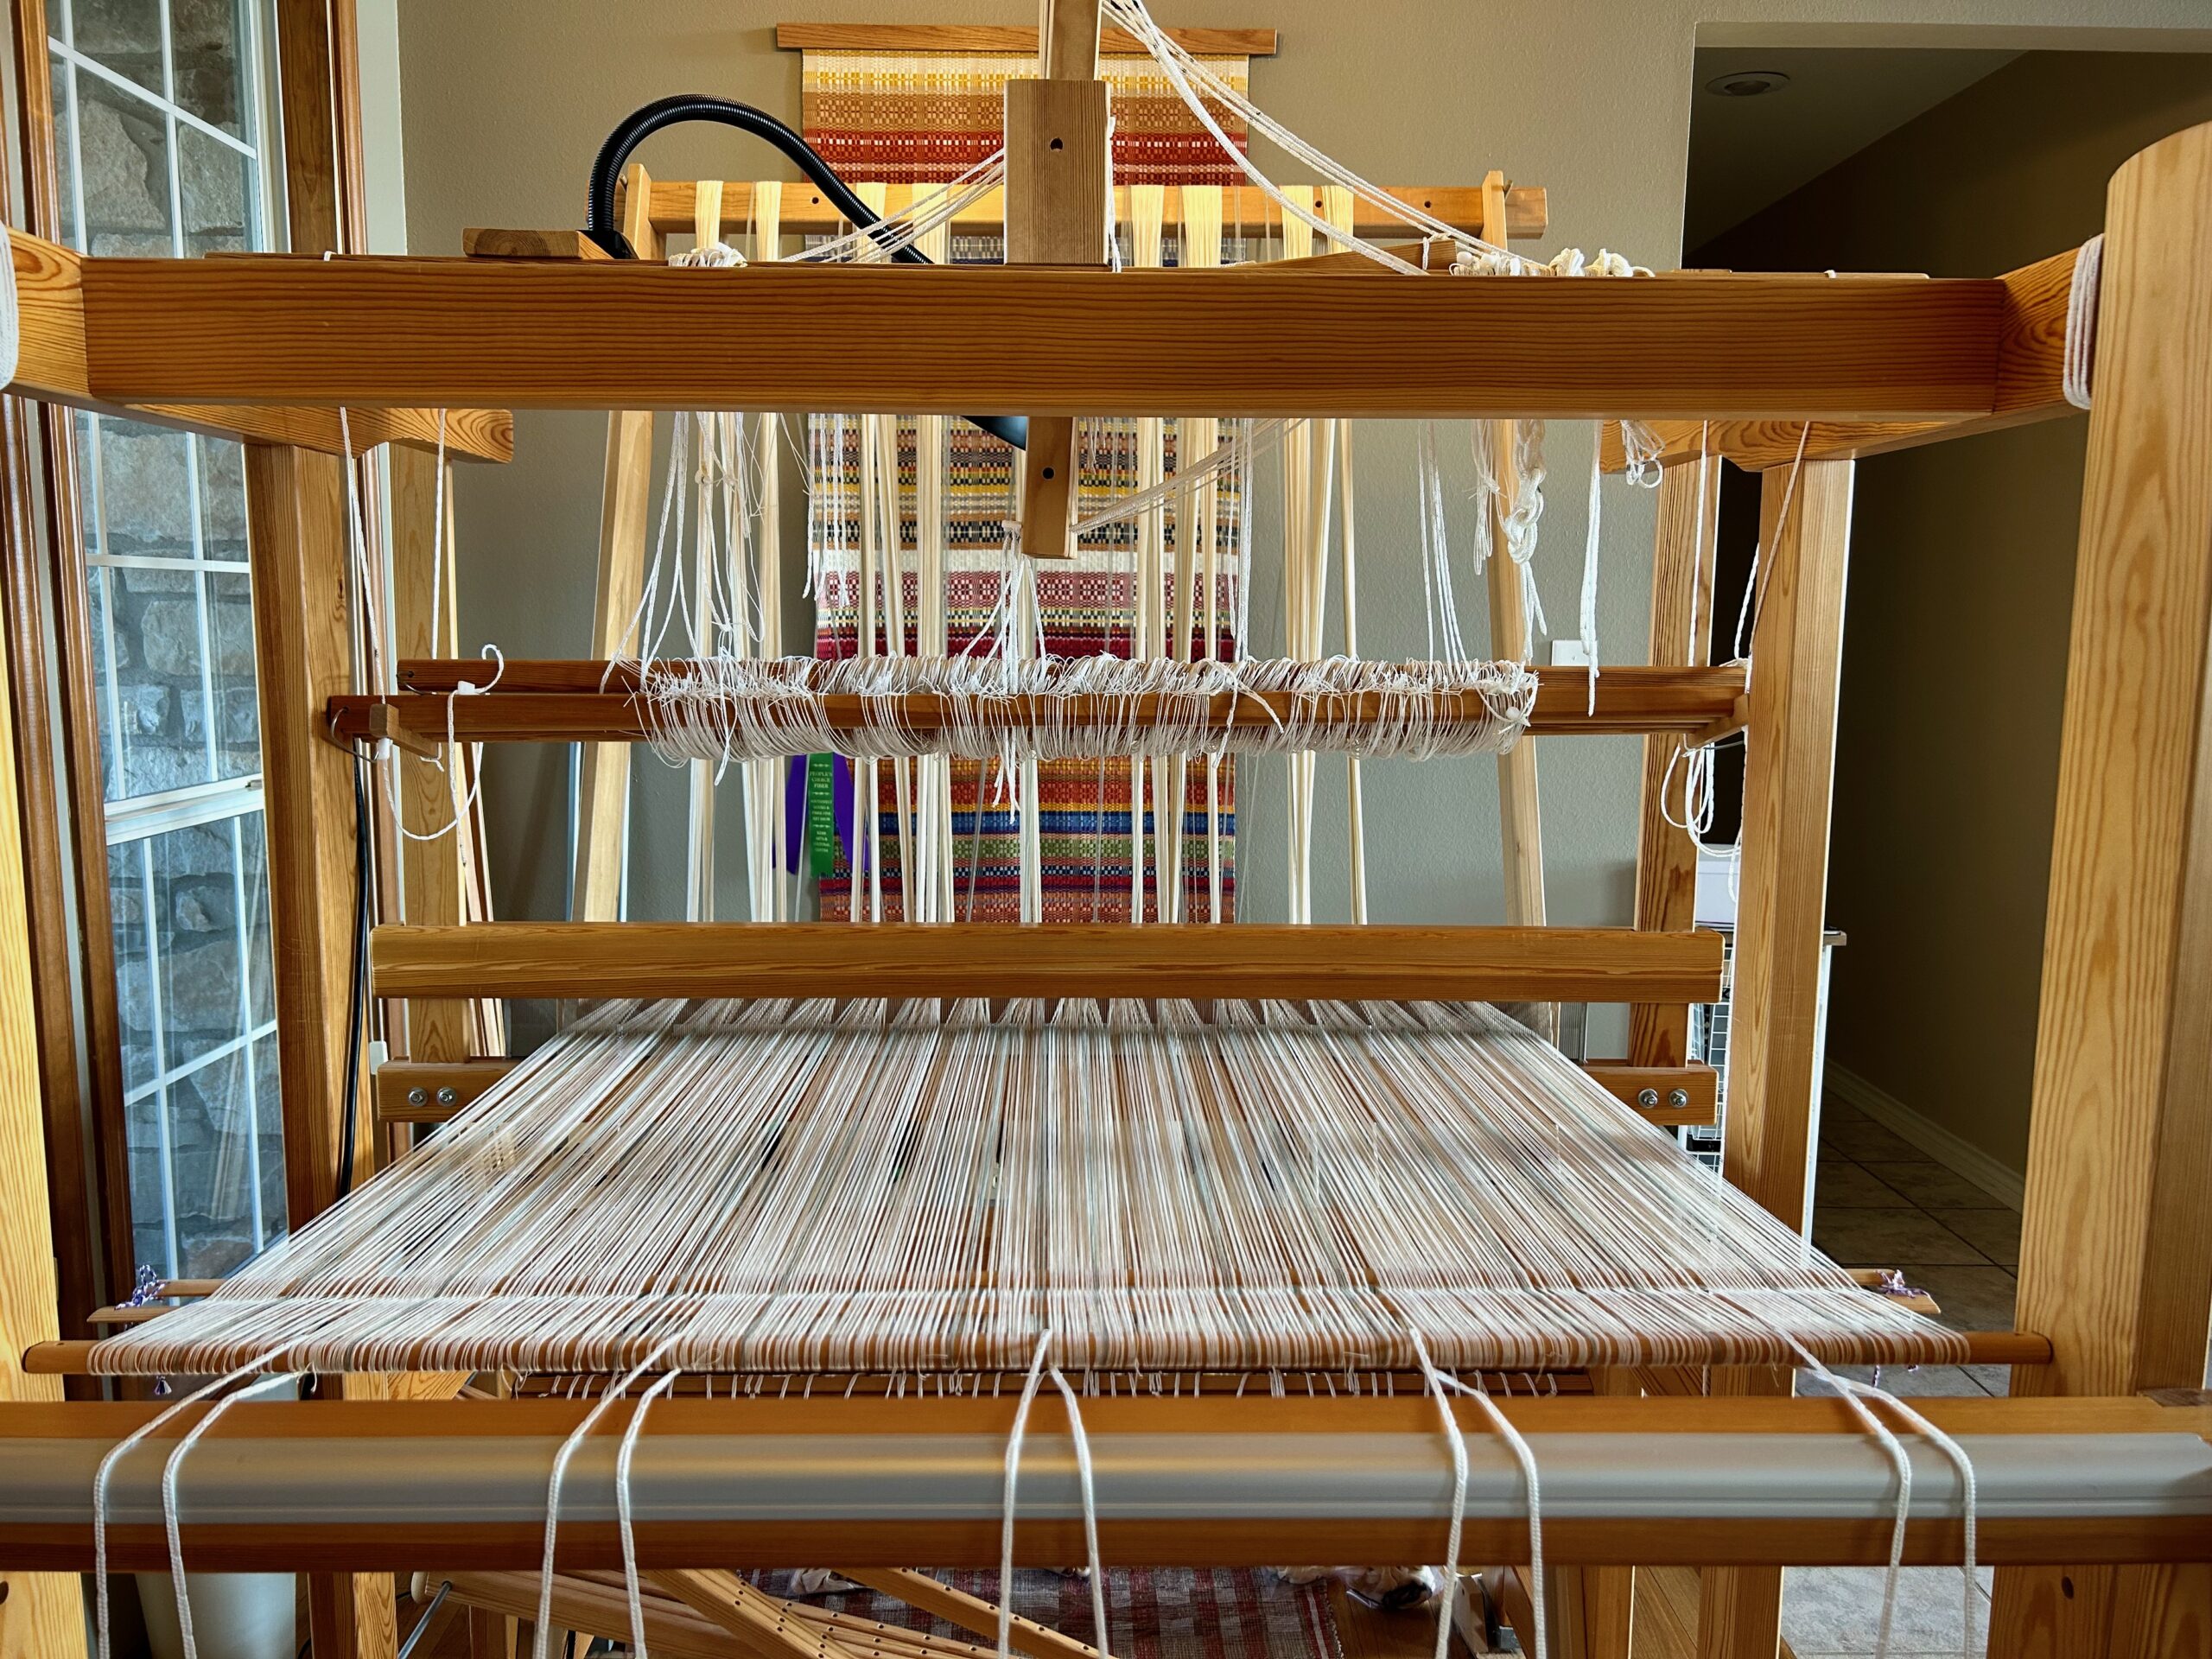 Extra Pound of Weaving Loops